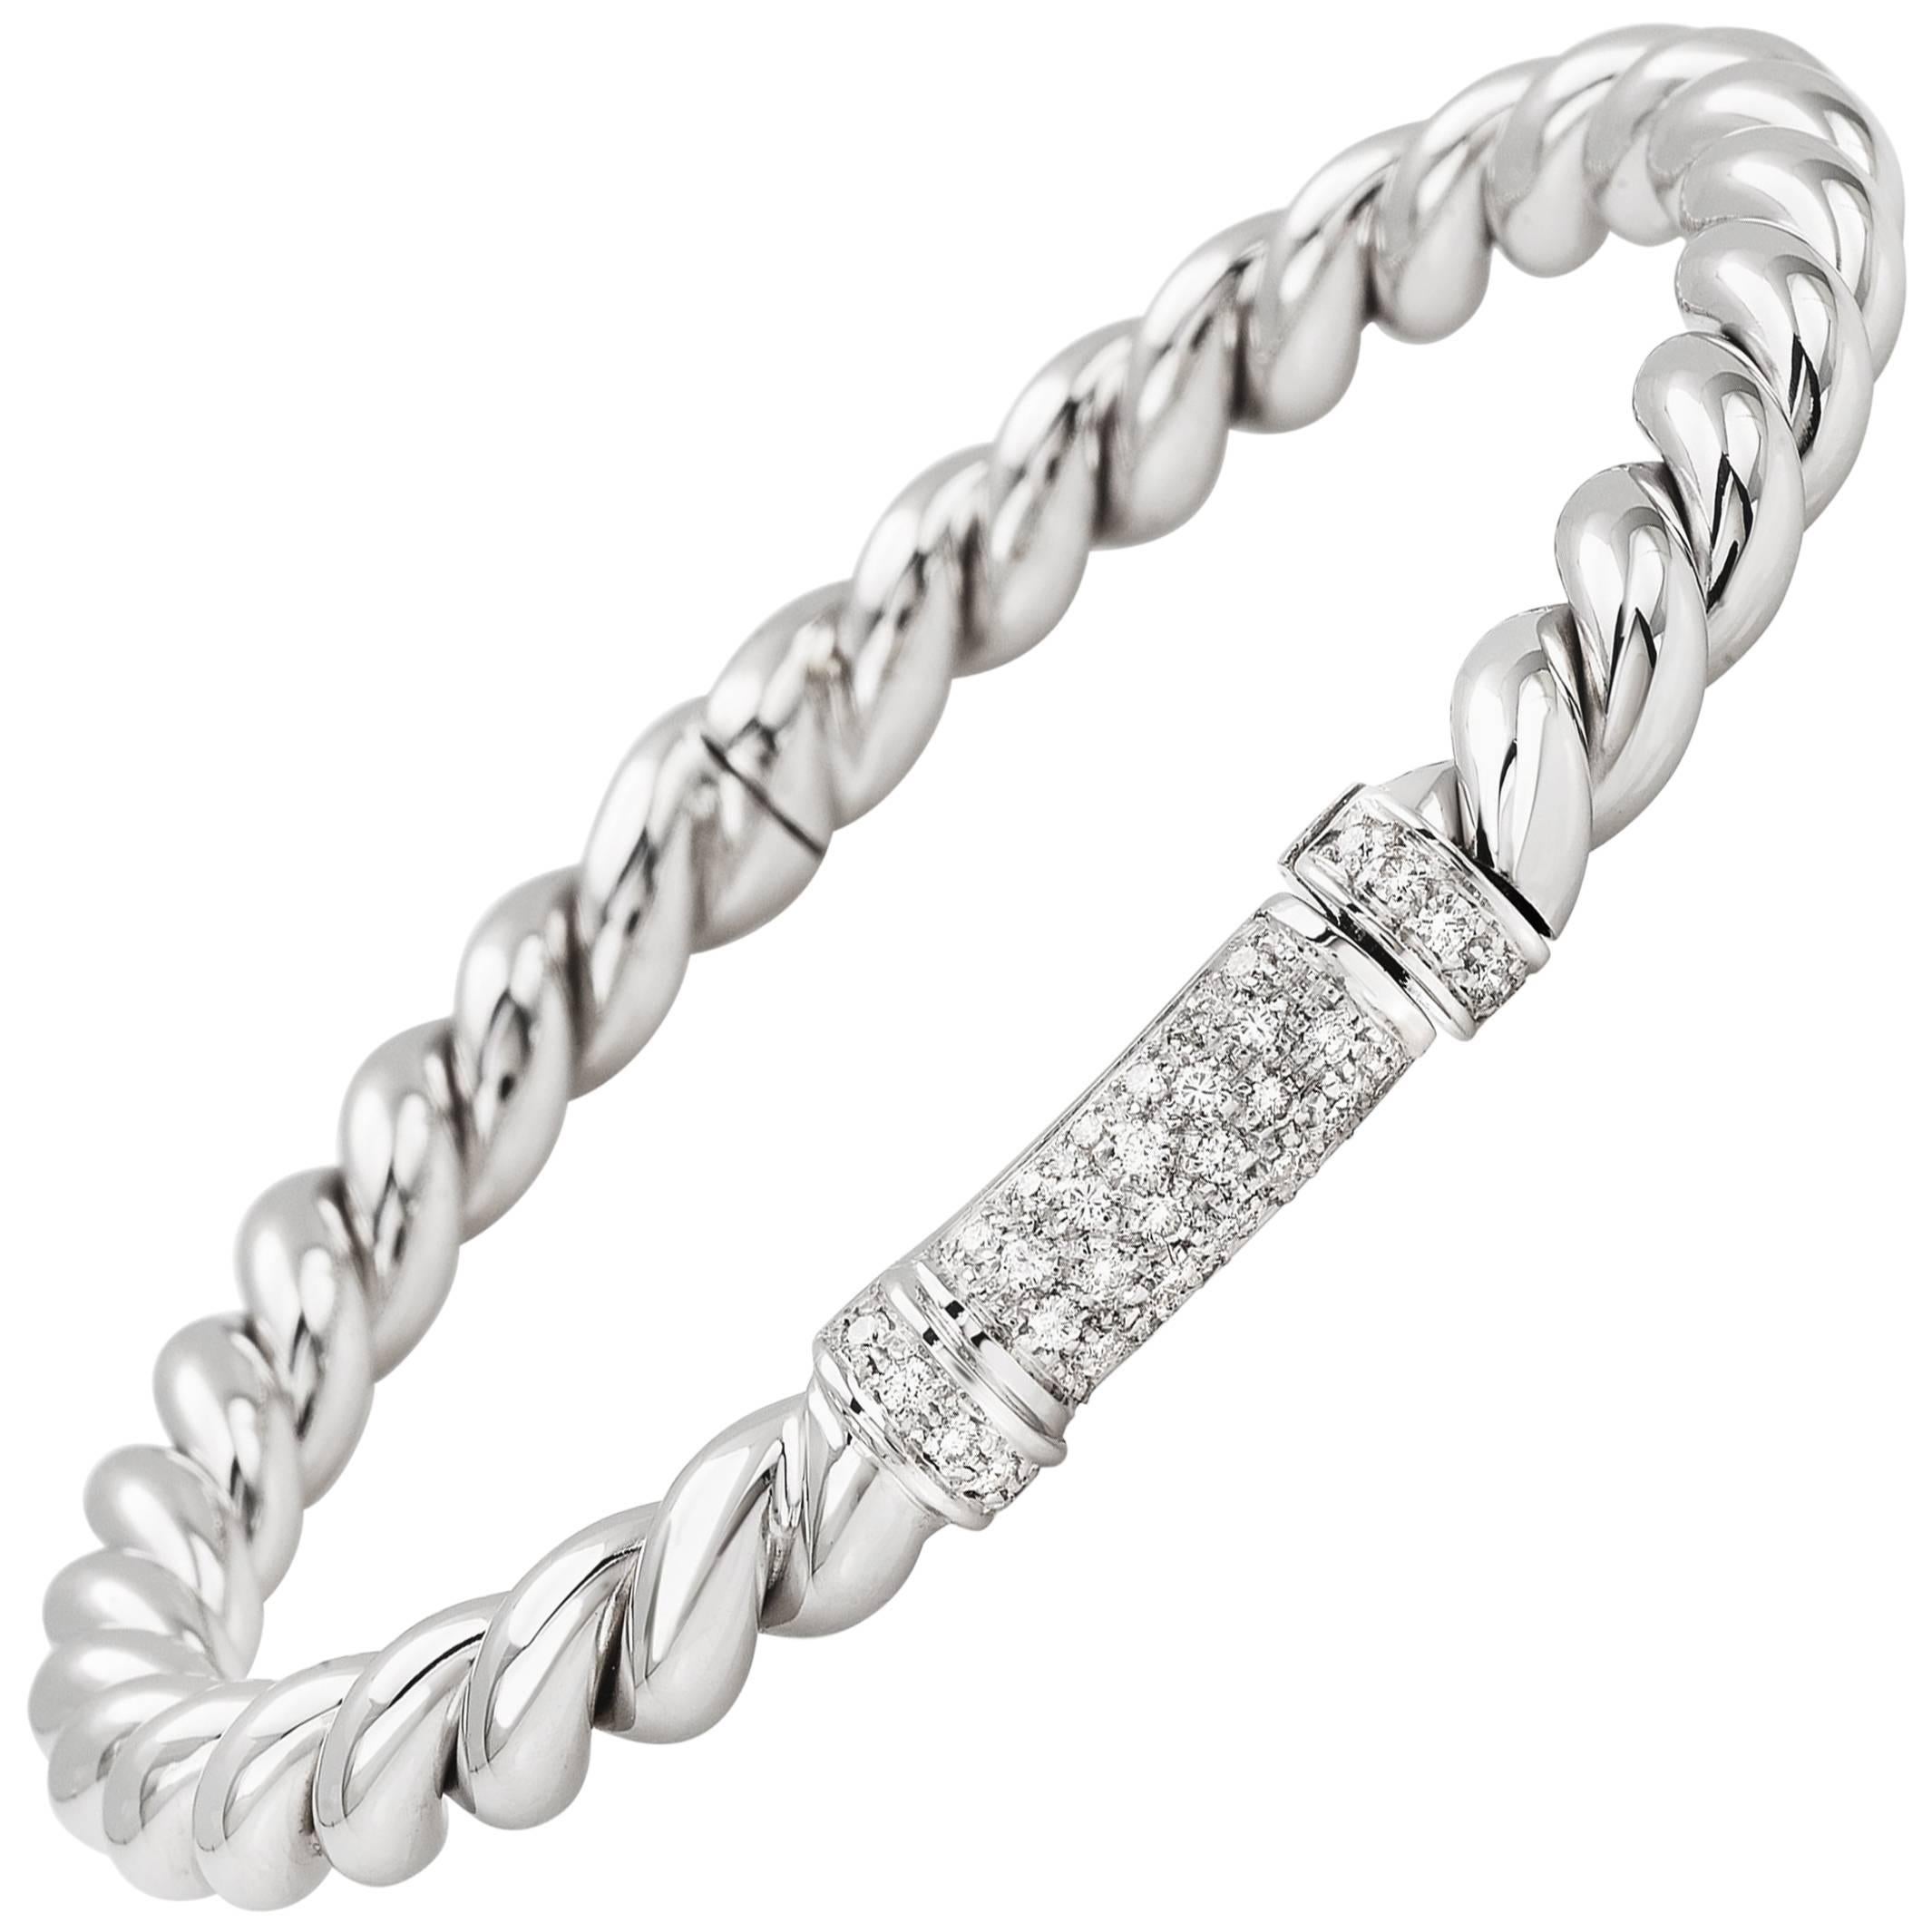 Bangle from the Collection "Rope" 18 Karat White Gold and Diamonds